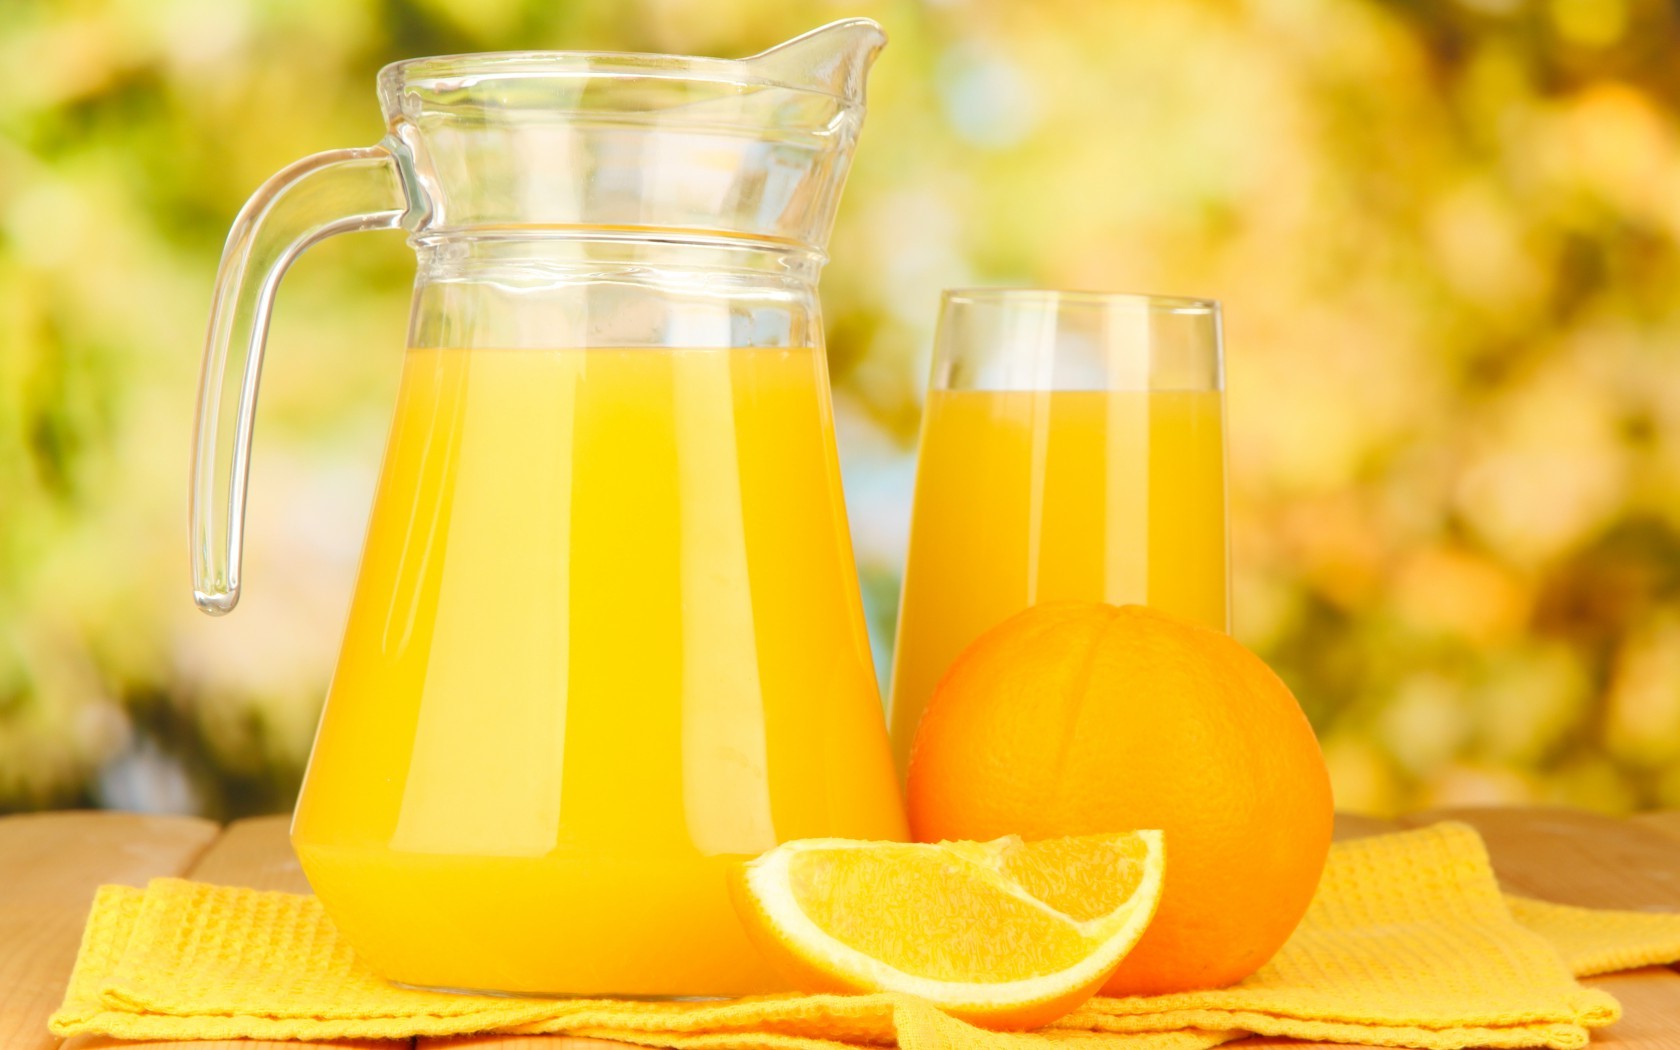 Orange Juice Wallpapers High Quality Download Free